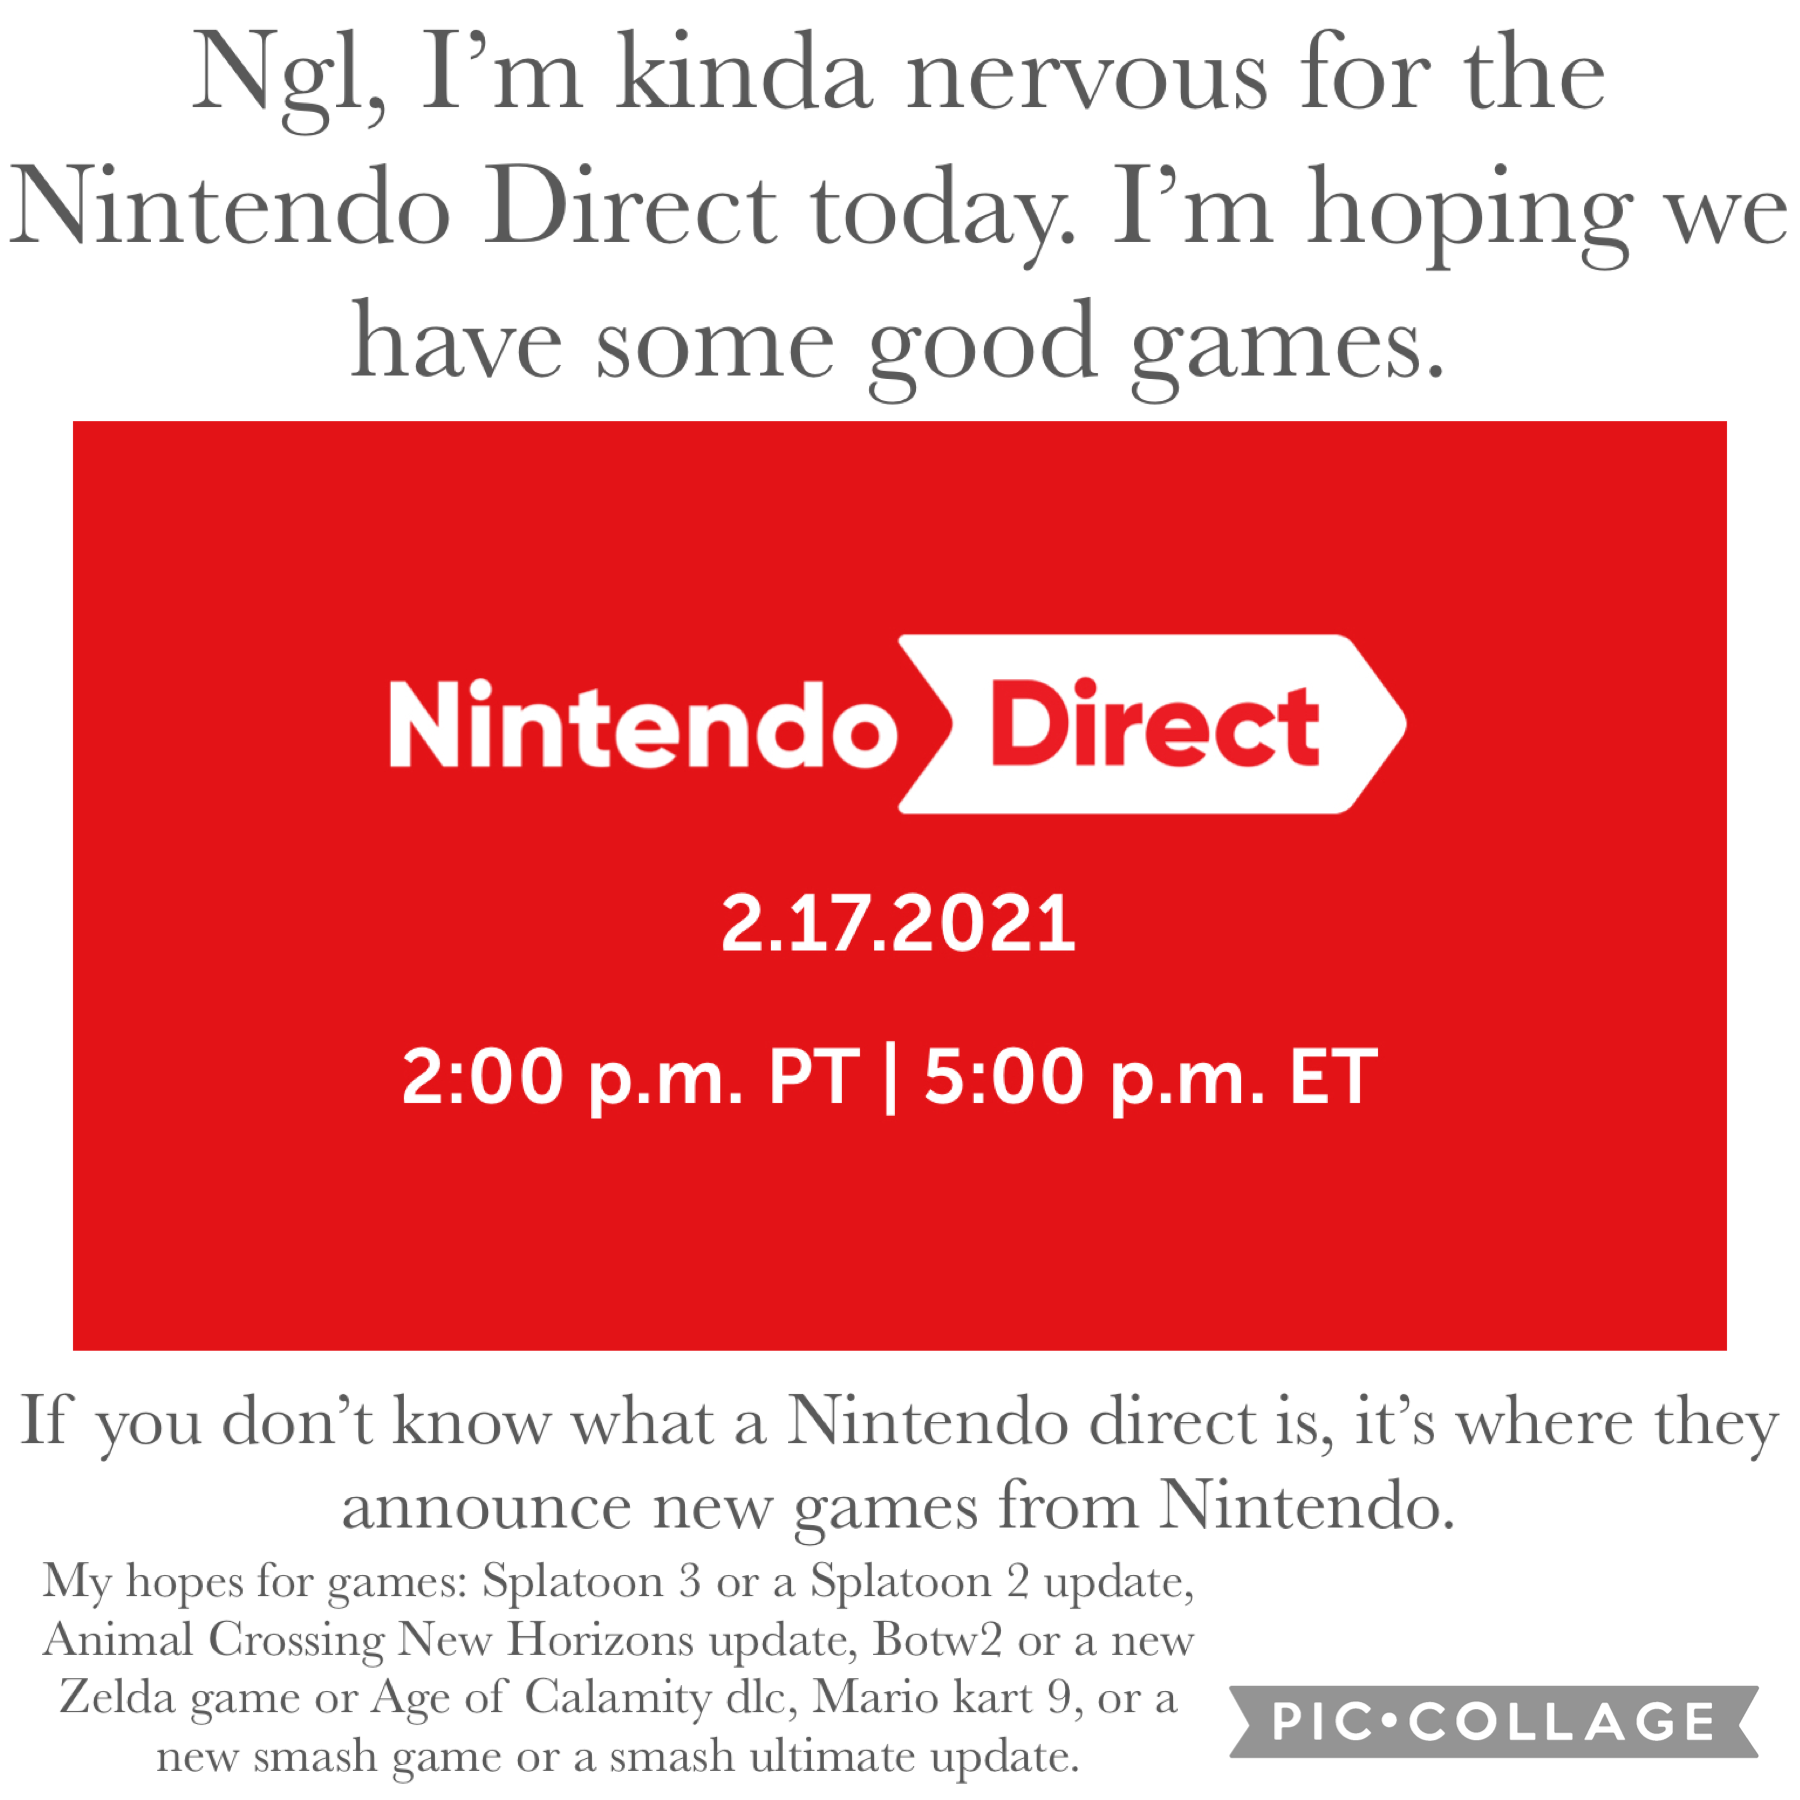 I really shouldn’t get my hopes up, but I feel like something BIG will be announced in the Direct today.